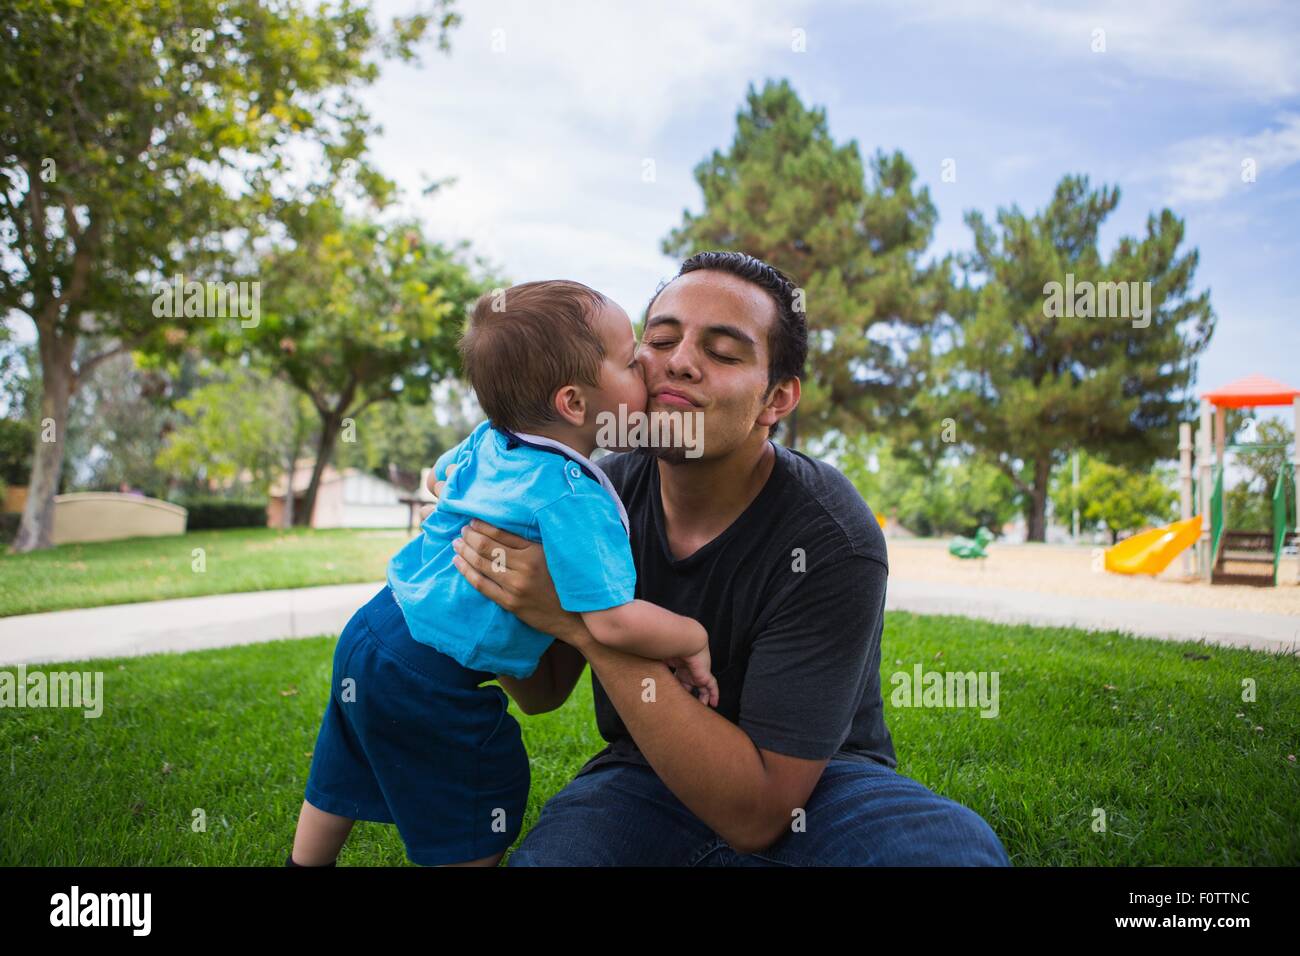 Male toddler kissing older adult brother in park Stock Photo